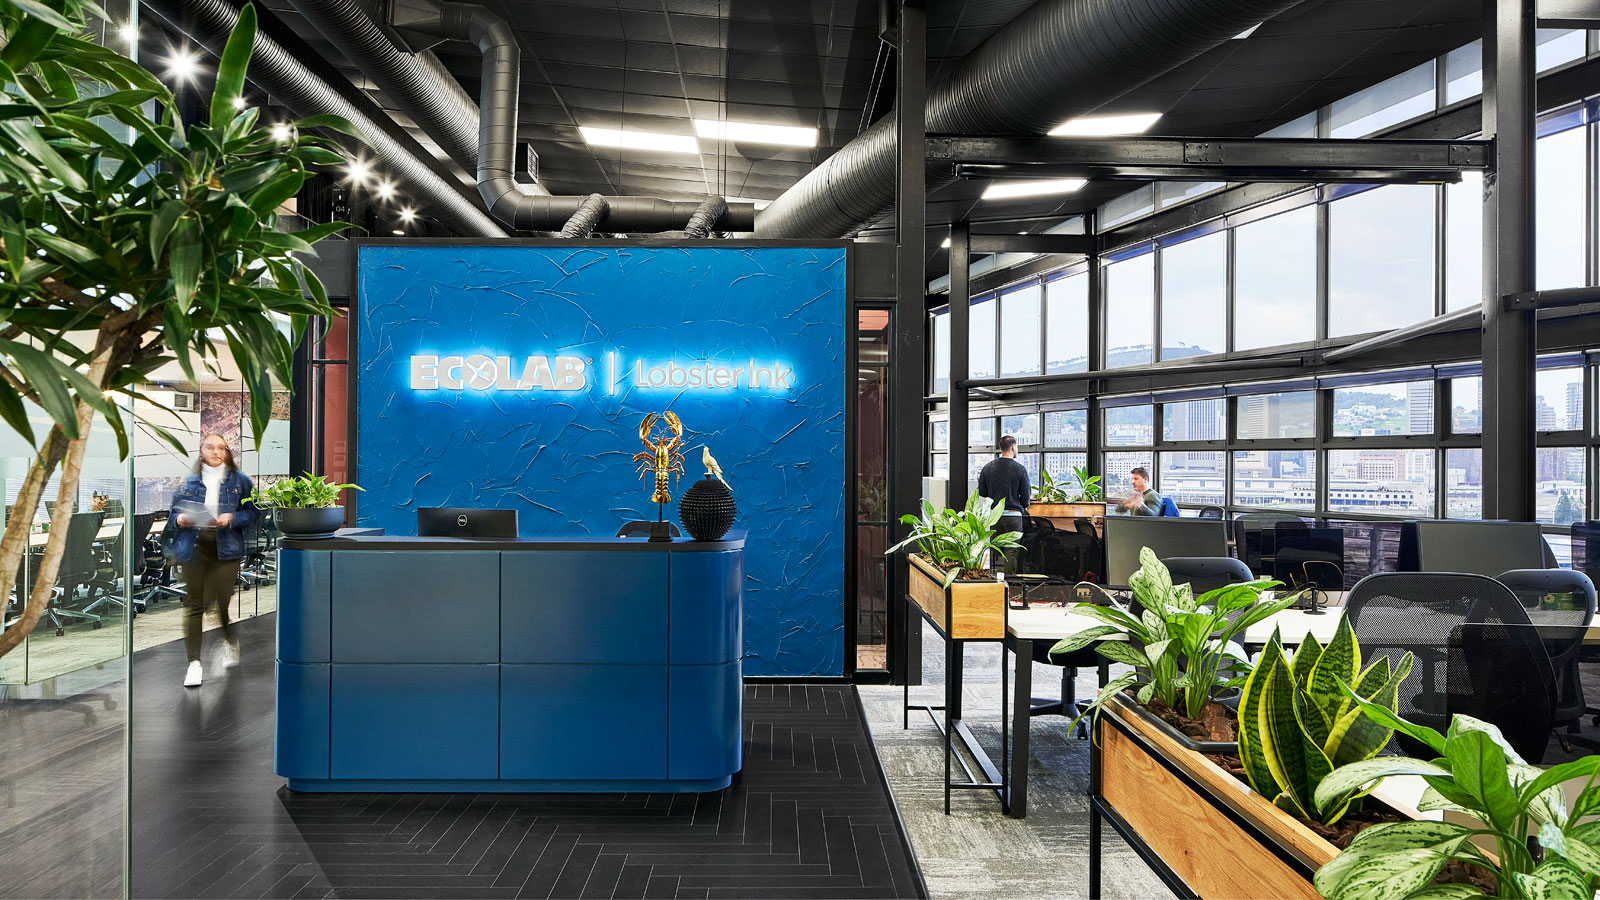 Tetris Design and Build designs new collaborative workspace for Eco Lab and Lobster Ink